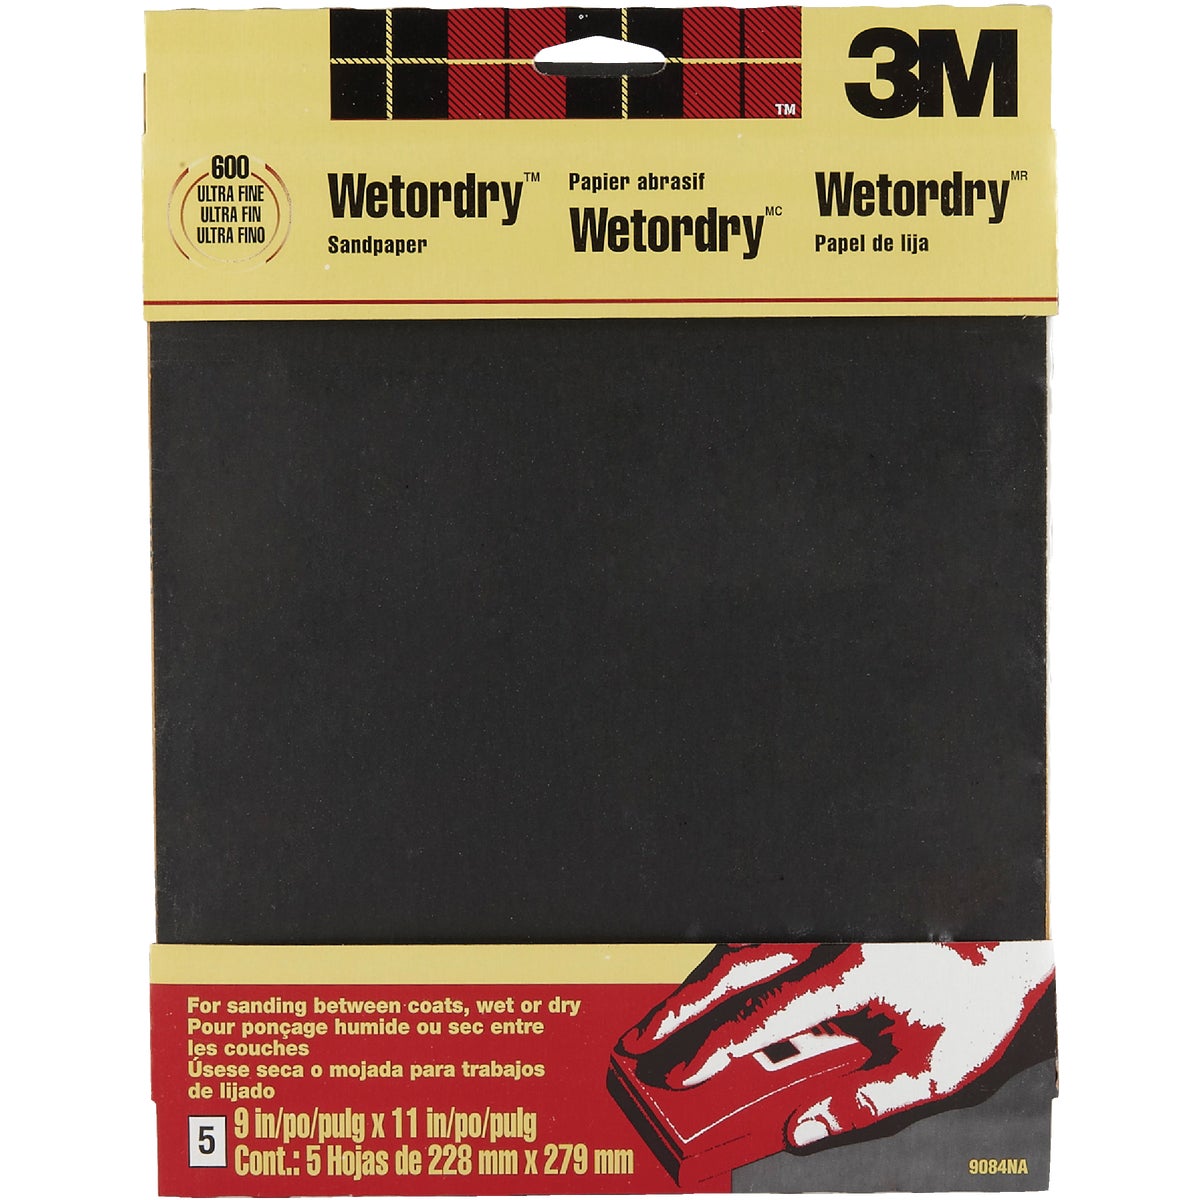 Item 357232, 3M Wetordry sandpaper cuts fast and smooth, and it can also be used to 